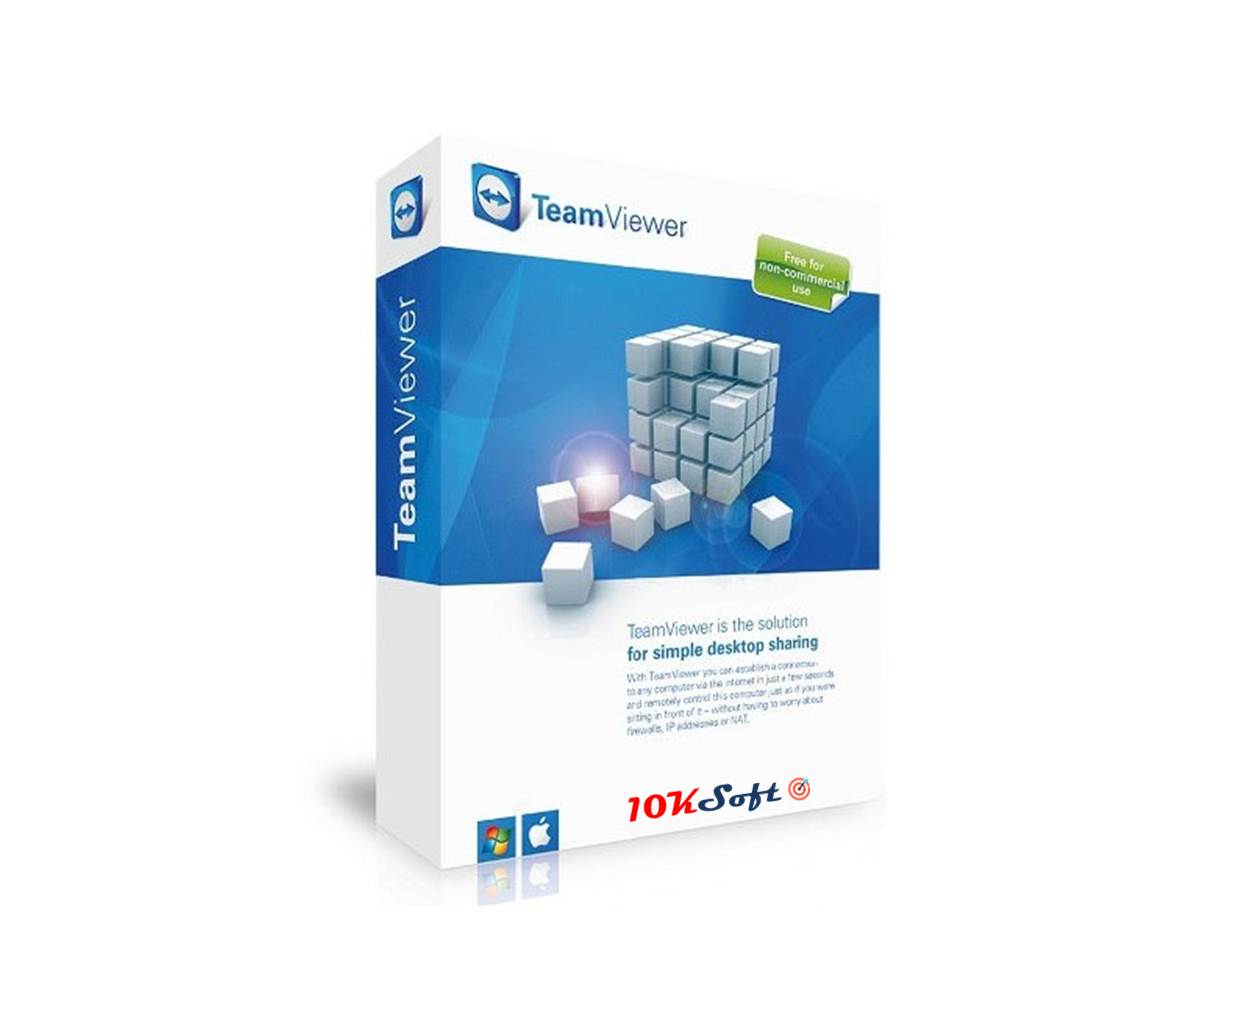 teamviewer 8 free download for windows 8 filehippo